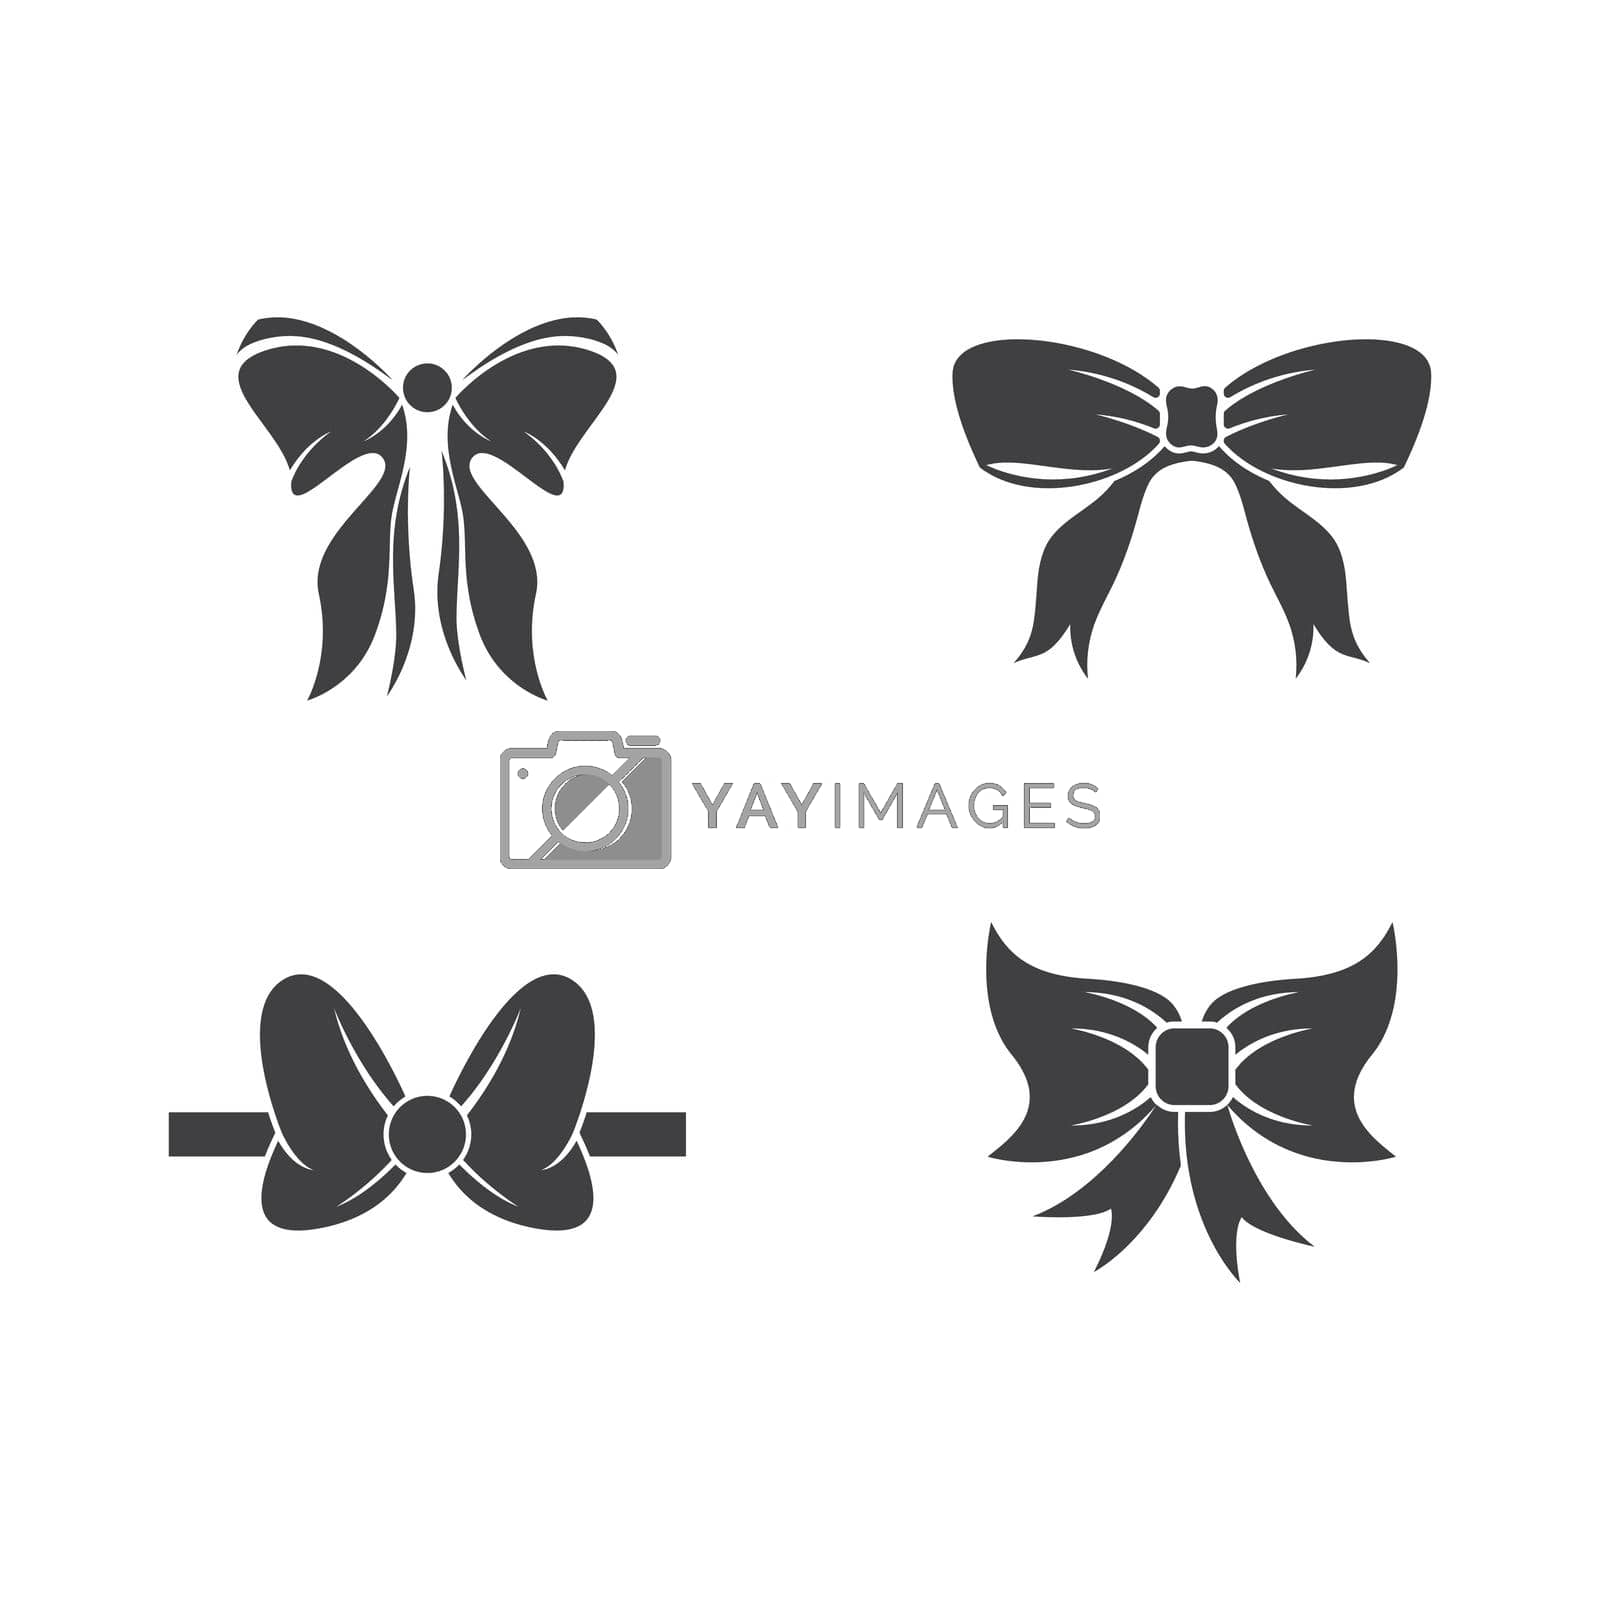 Royalty free image of Bow tie icon by awk